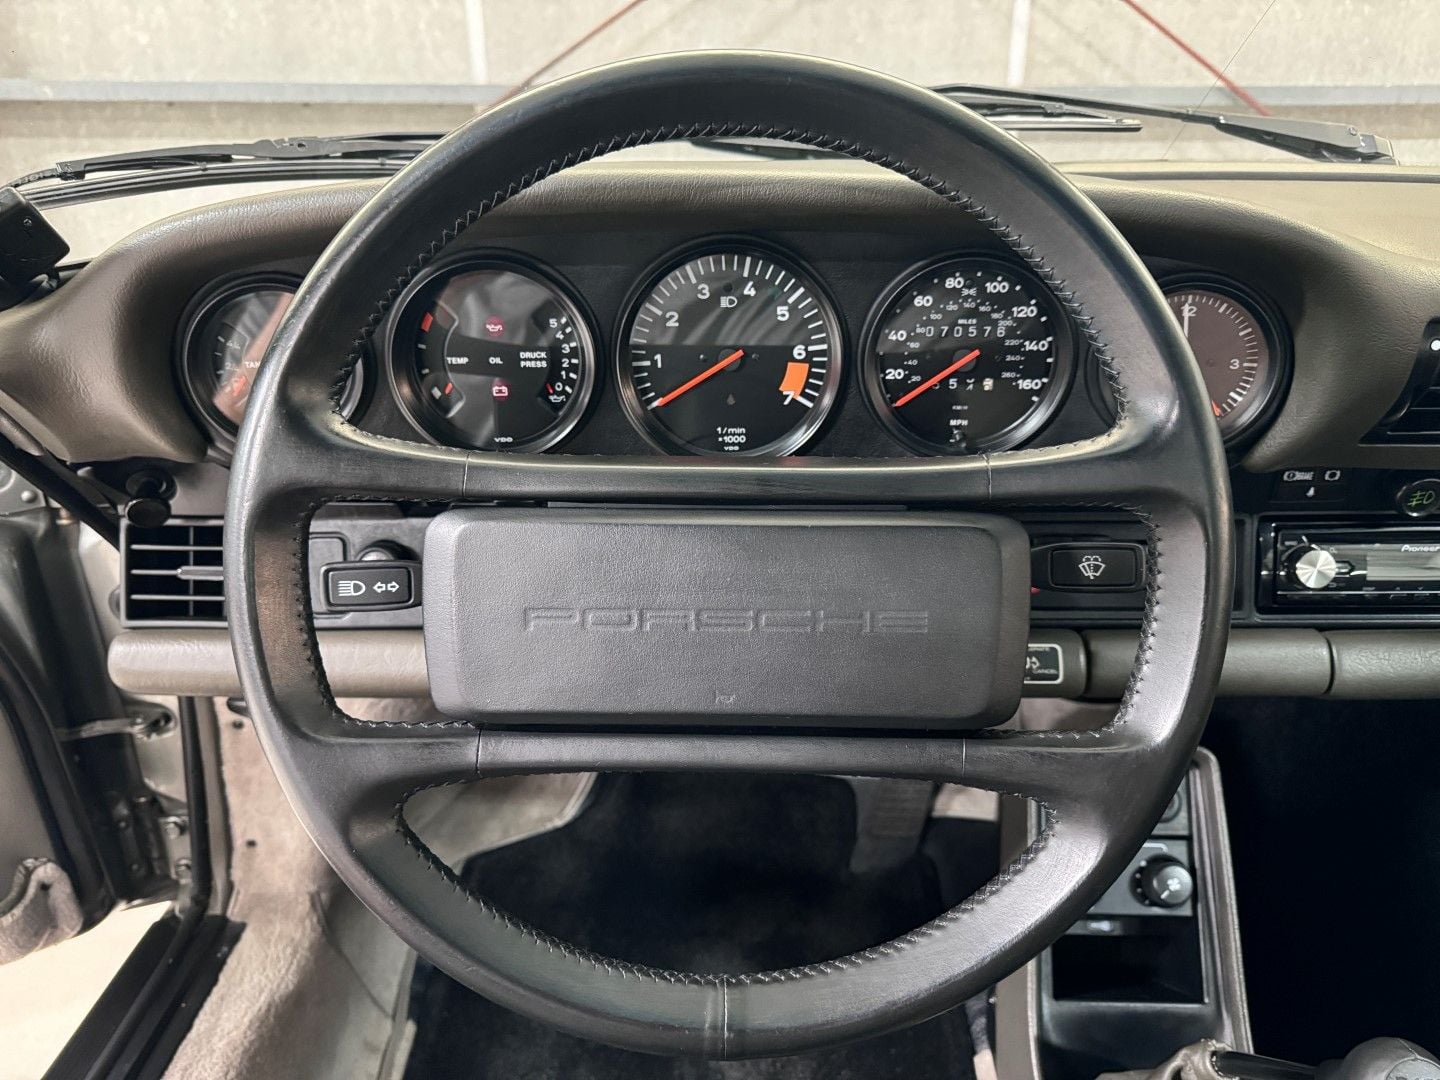 1988 Porsche 911 - 1988 Porsche 911 Granite Green G50 Coupe - Used - VIN WP0AB0912JS120138 - 70,576 Miles - 6 cyl - 2WD - Manual - Coupe - Gray - Twinsburg, OH 44087, United States